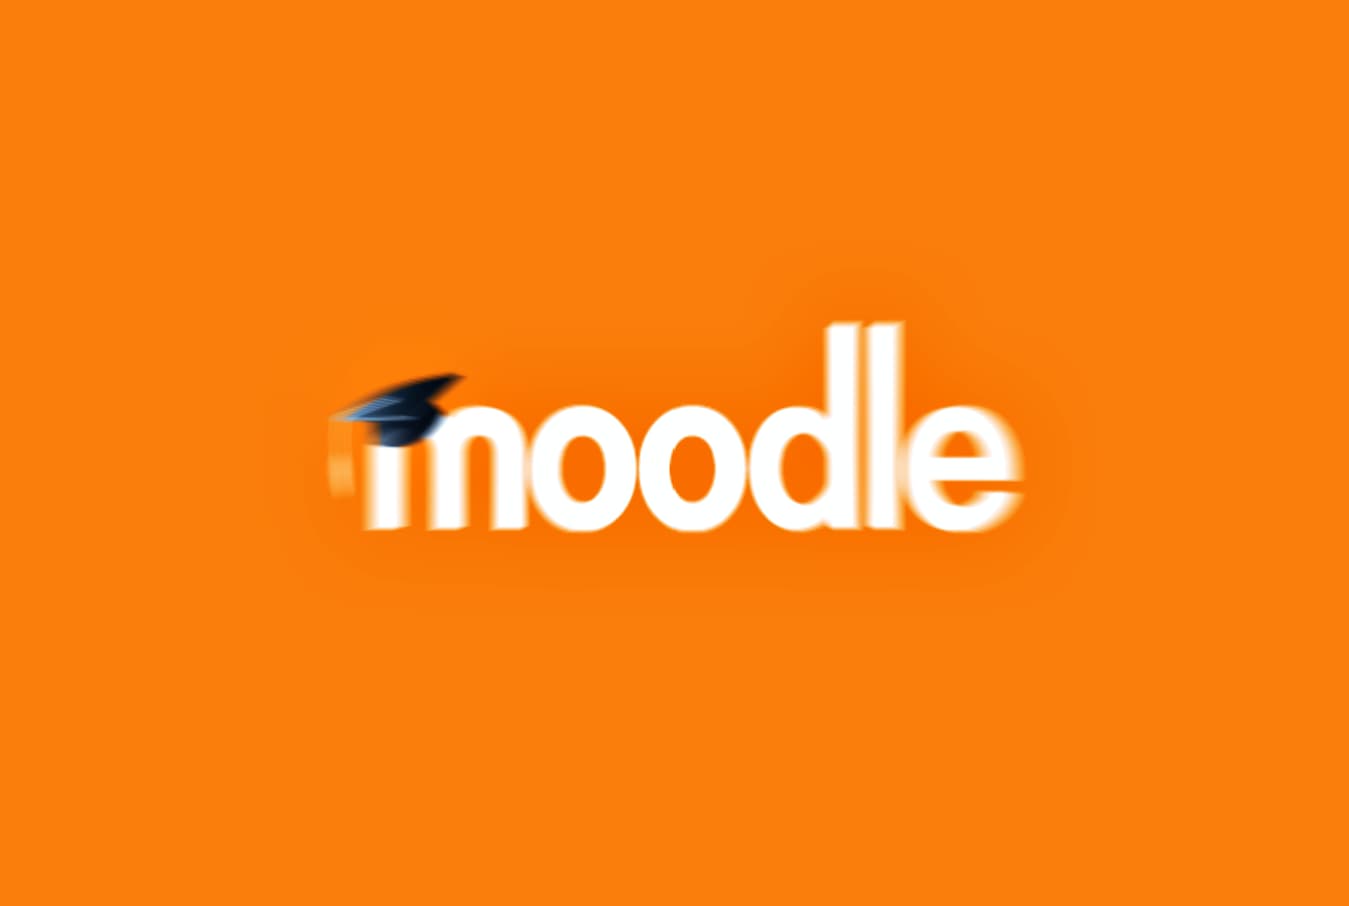 6-year-old Moodle flaw exposed millions to account takeover attack